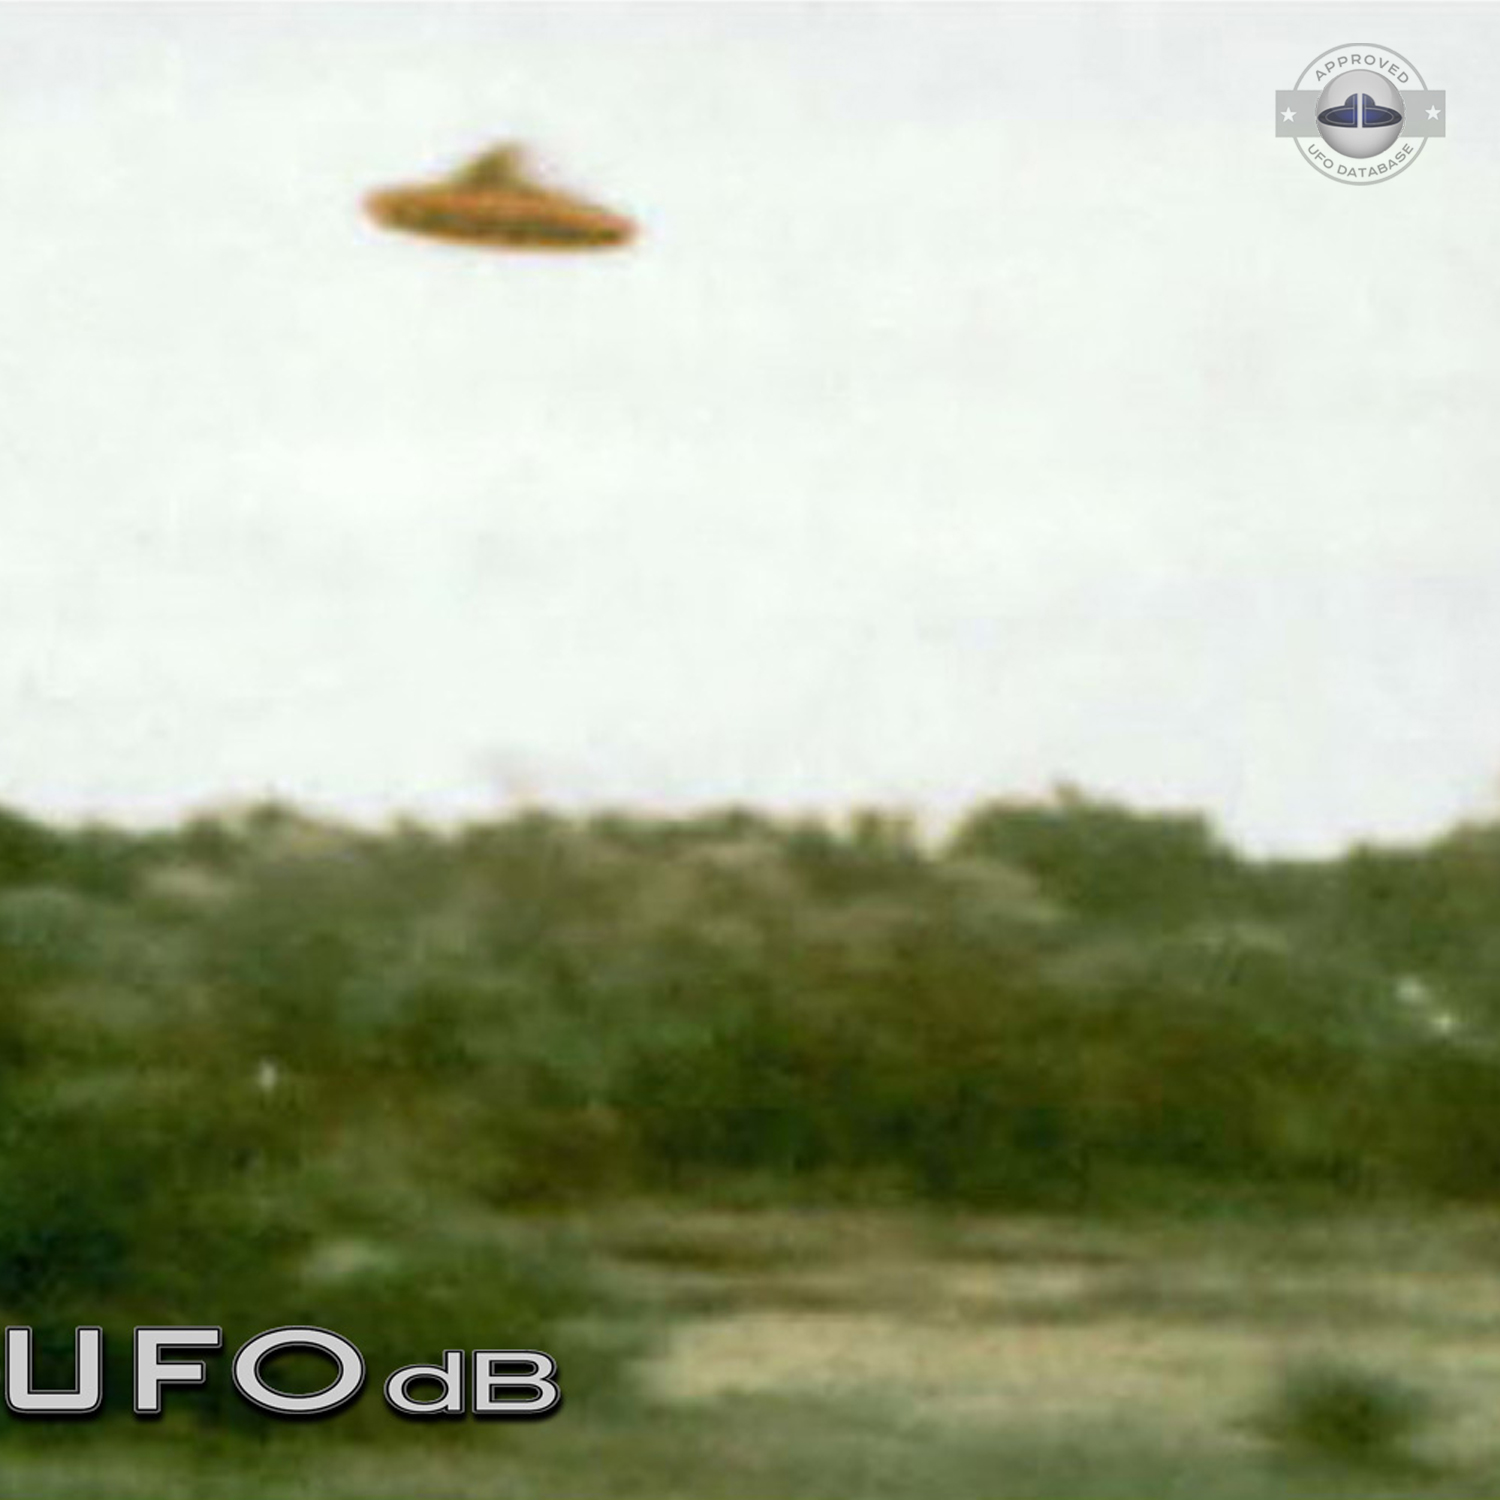 ufo picture was taken from a car ufo was few hundreds meters away UFO Picture #62-2